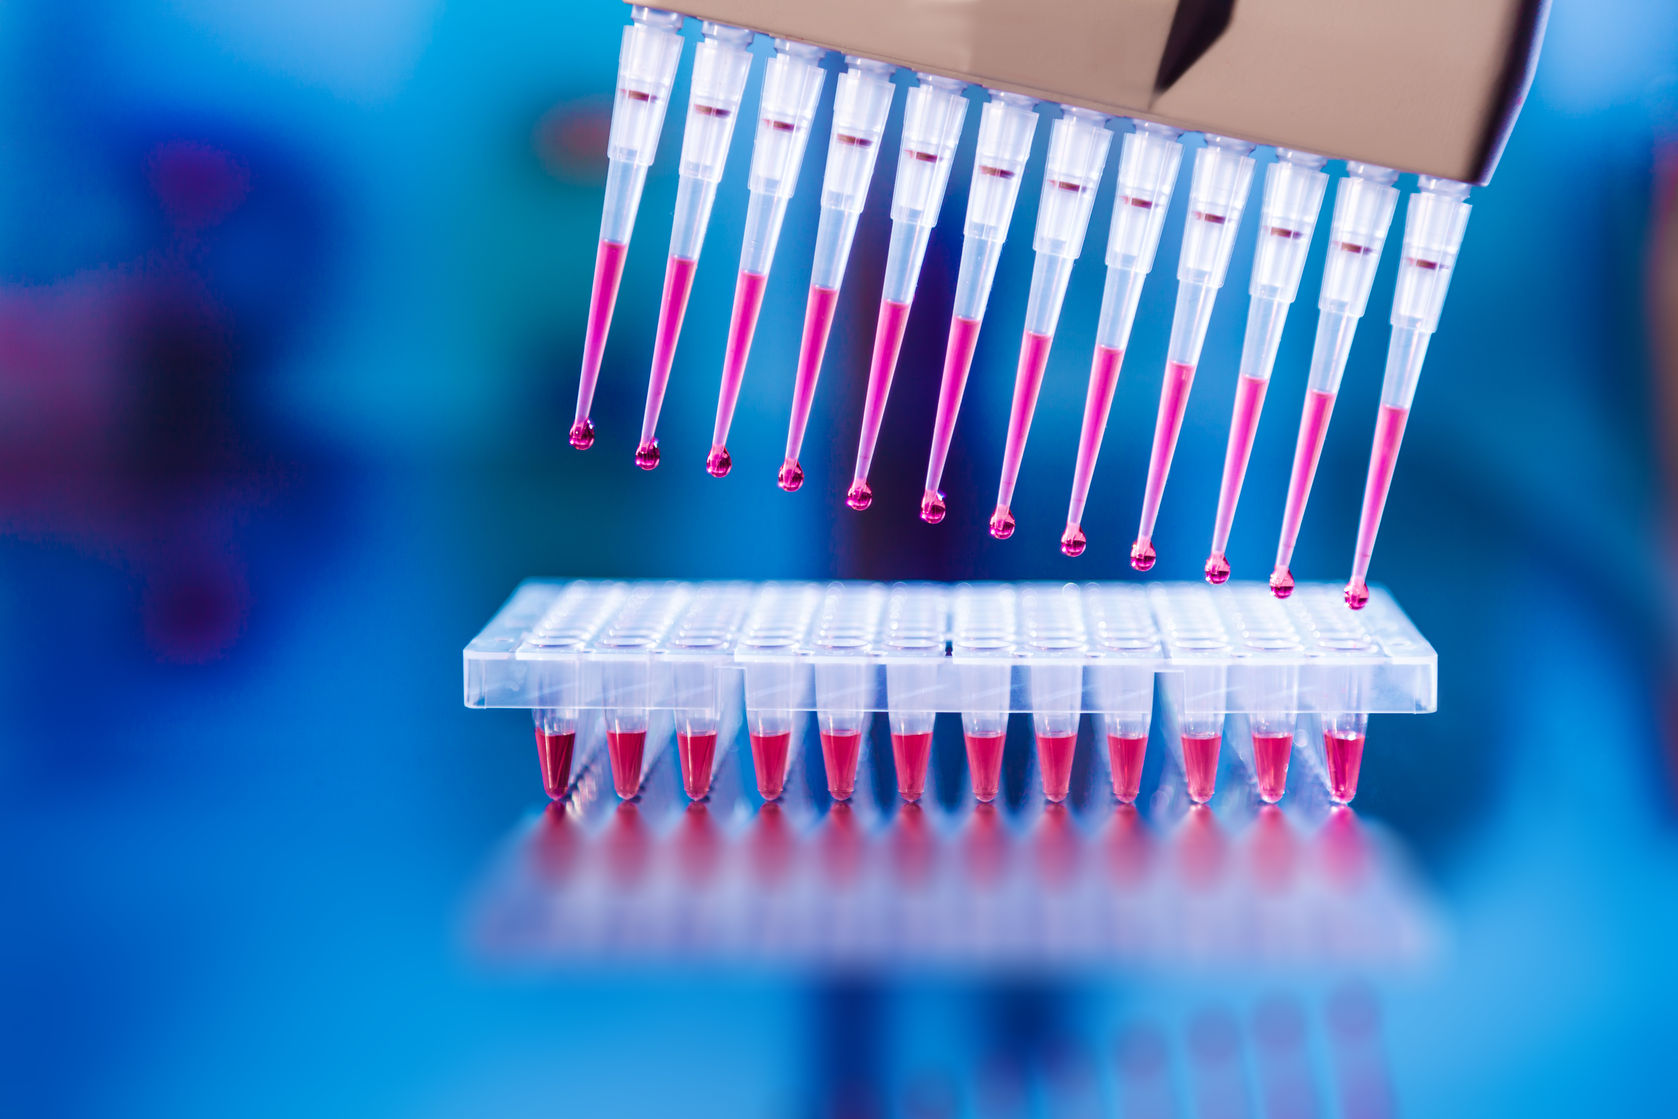 Indonesian lab chain Diagnos acquires biobank startup Asa Ren for $24m